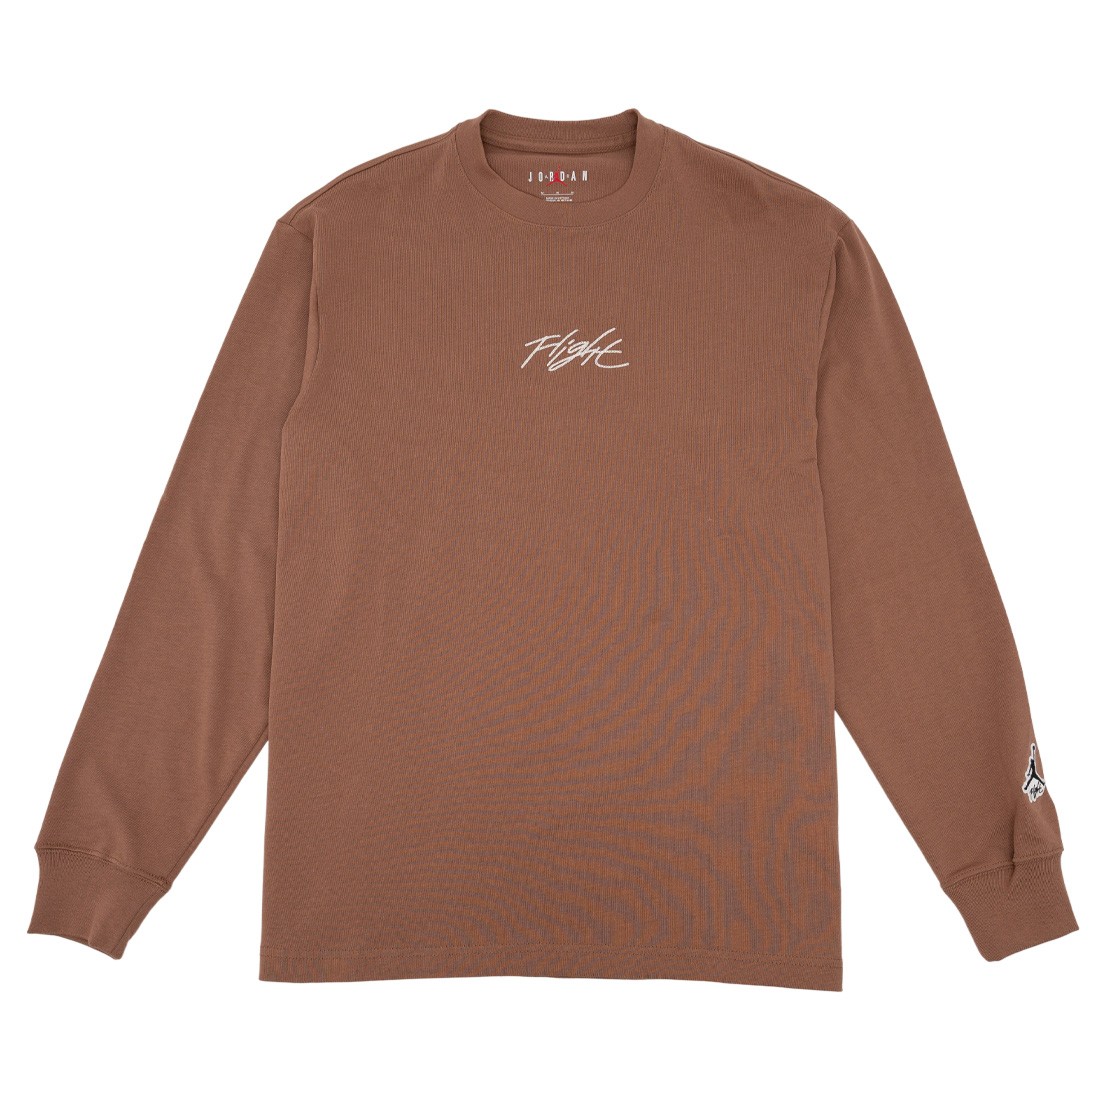 Crew Neck Knit Jumper in Brown DONE & DUSTED 